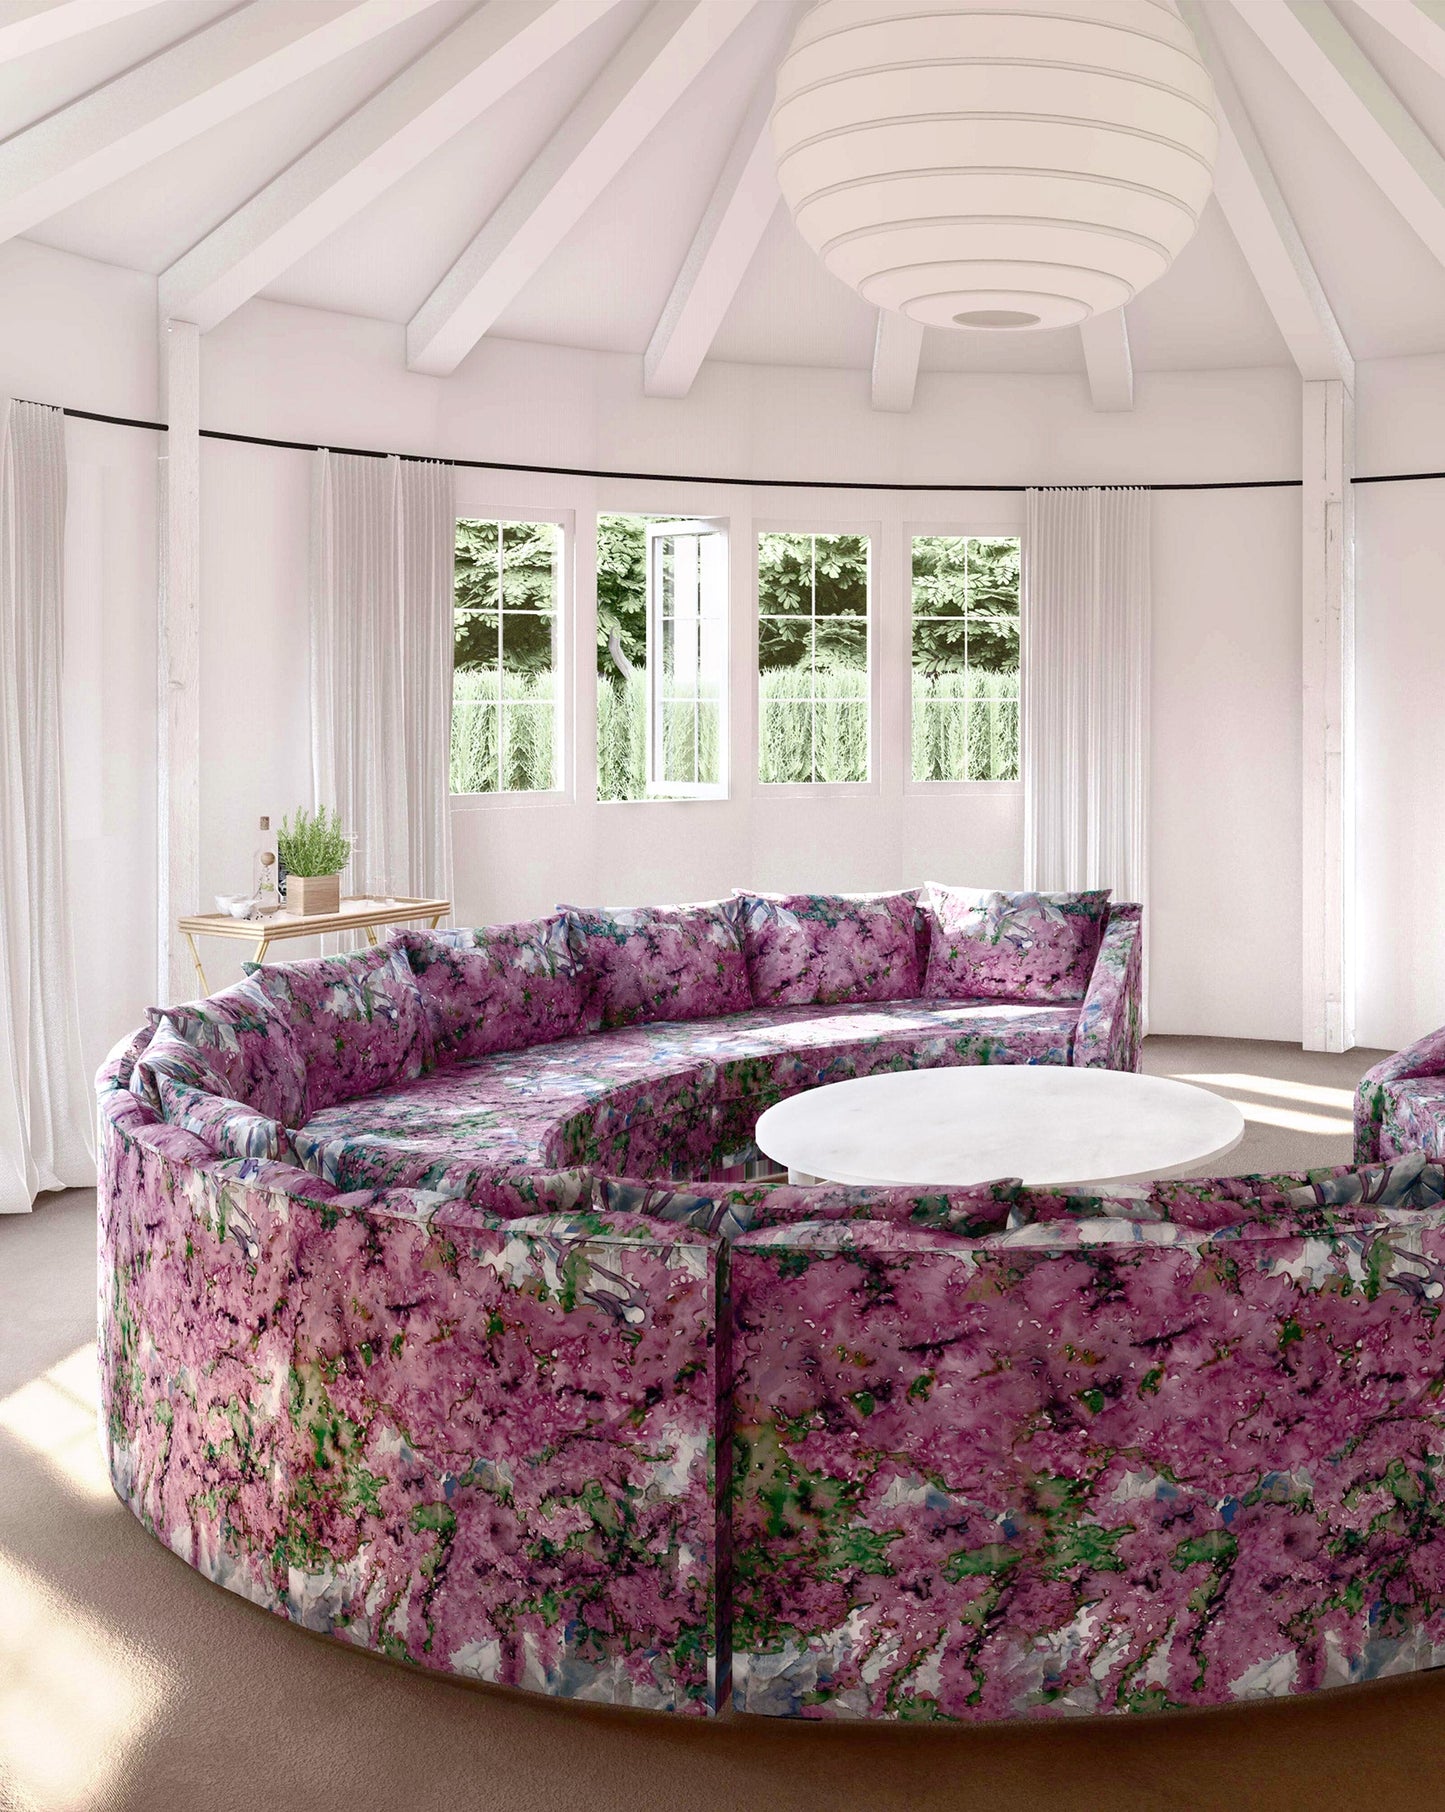 A living room with a circular couch and a coffee table adorned with Inflorescence Fabric Pomegranate geometric patterns